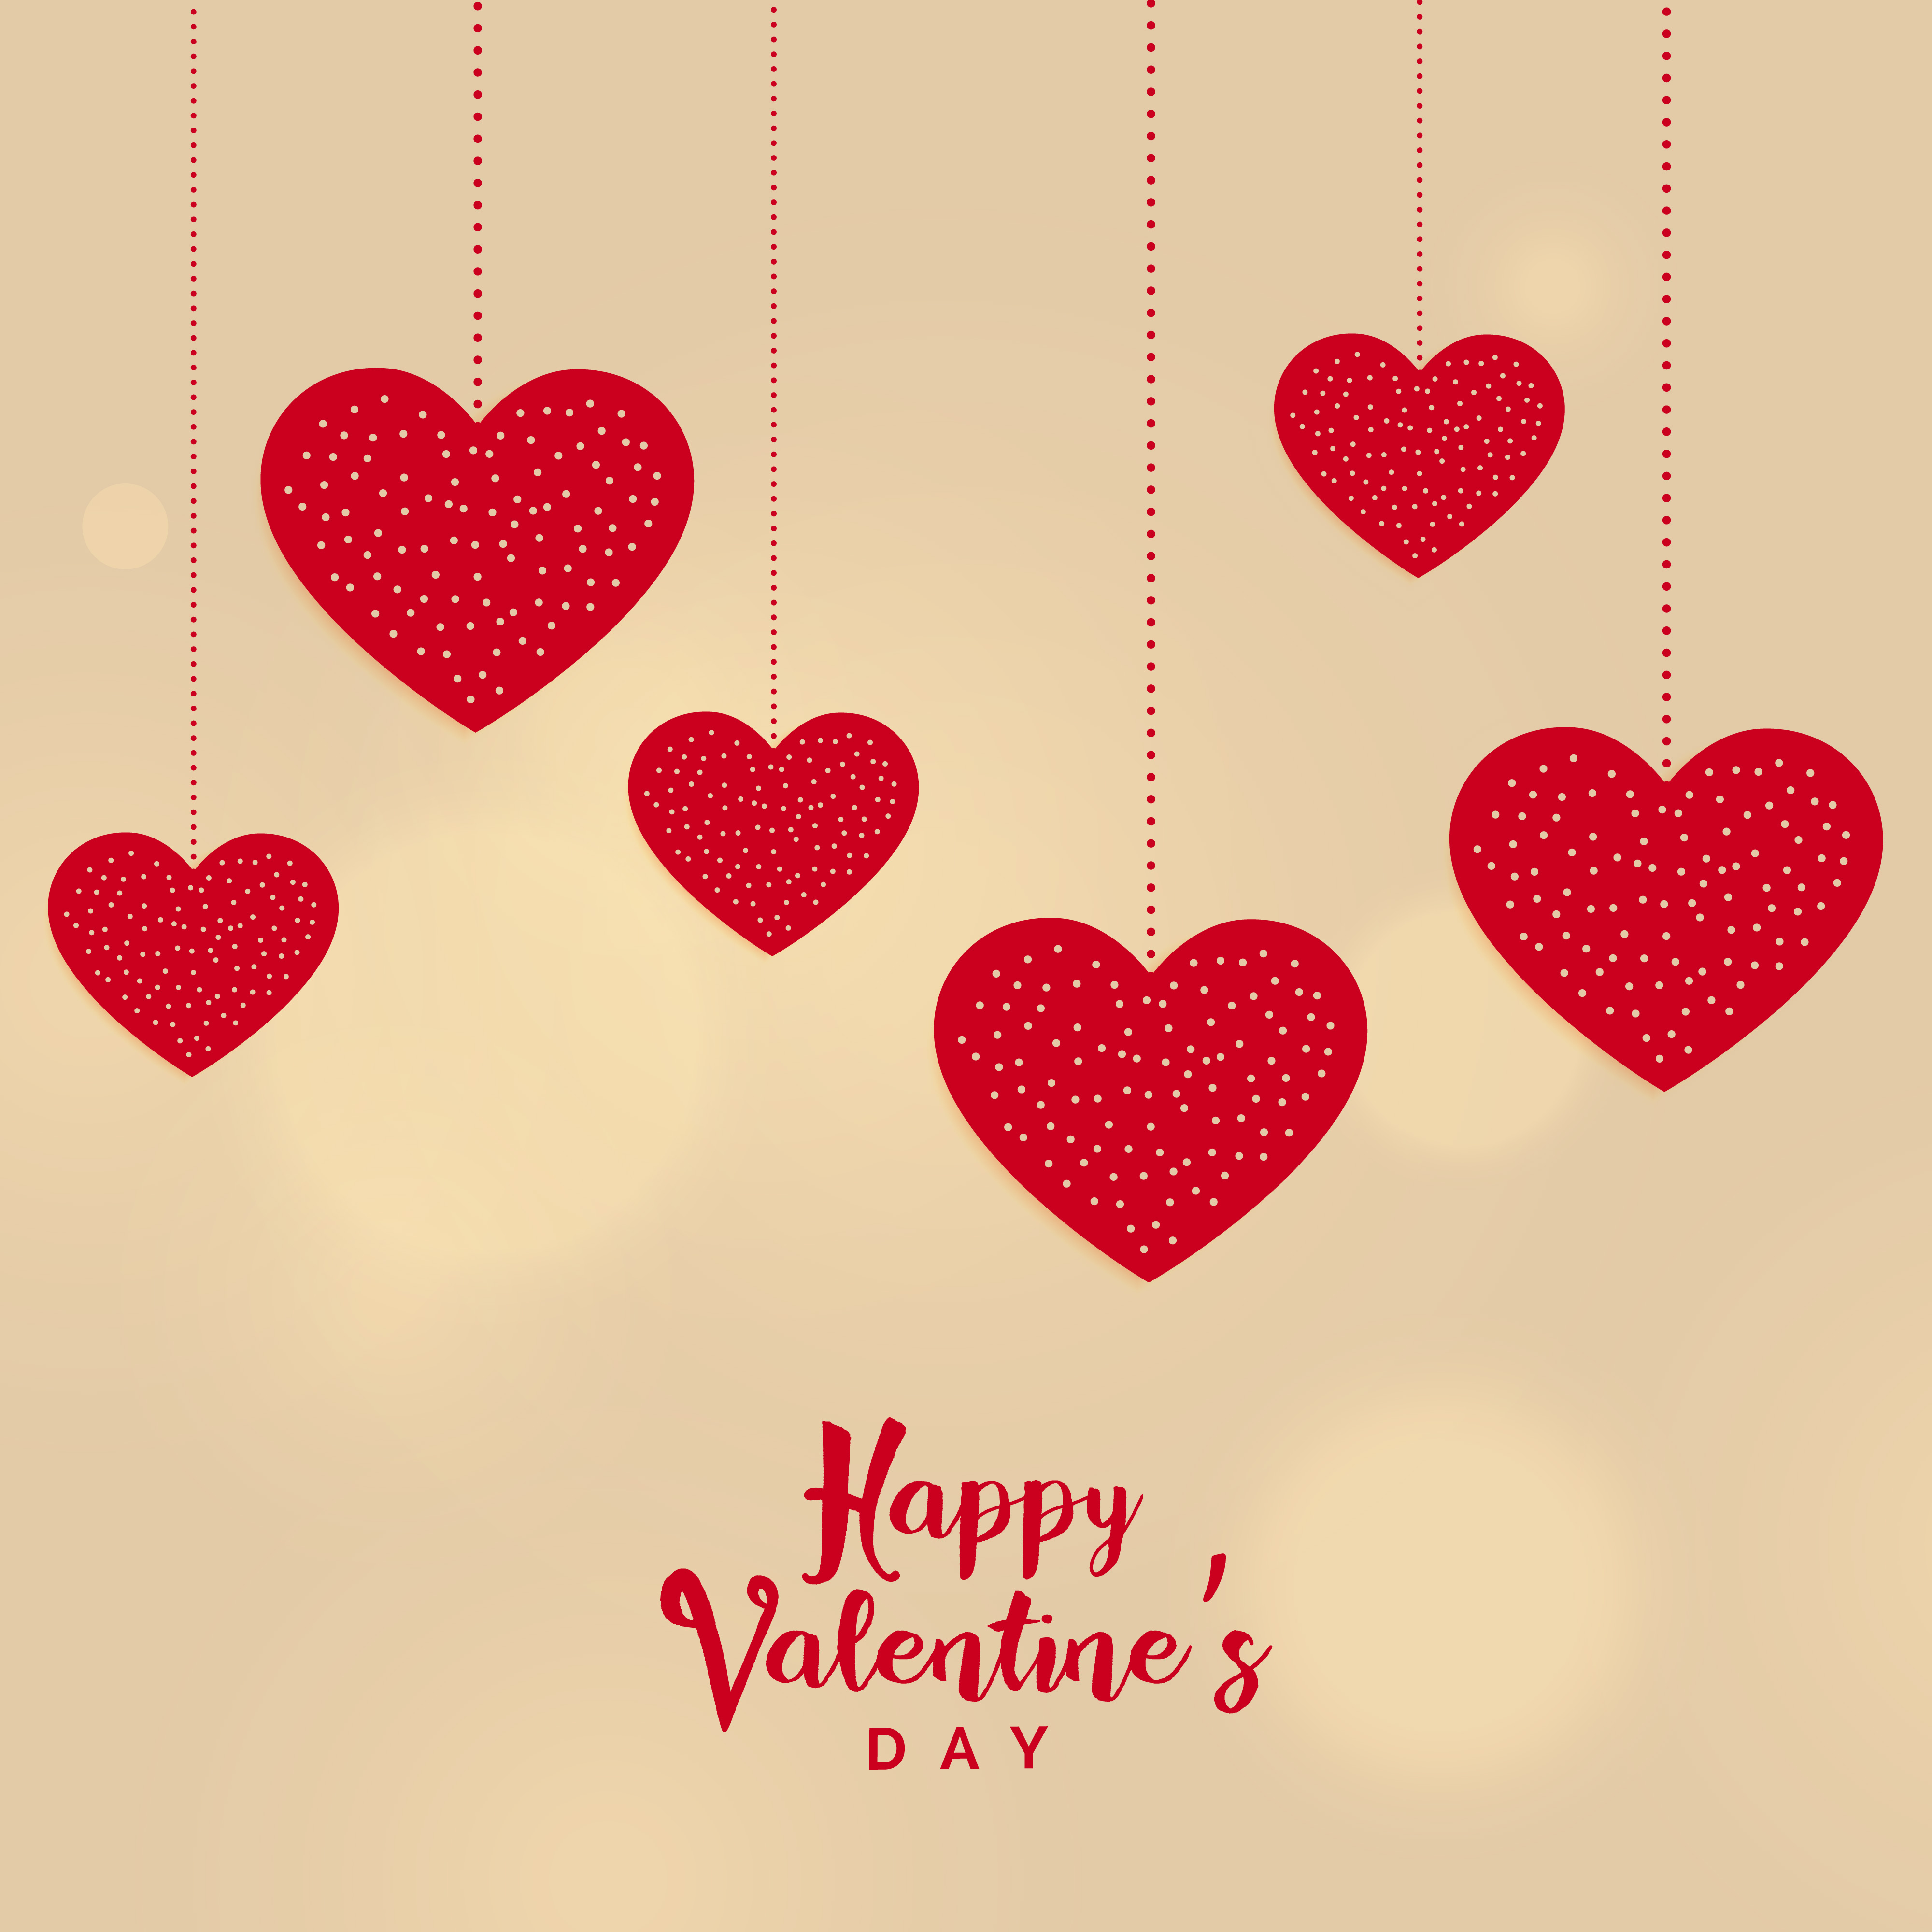 happy valentine's day hanging hearts background - Download Free Vector Art, Stock ...4000 x 4000